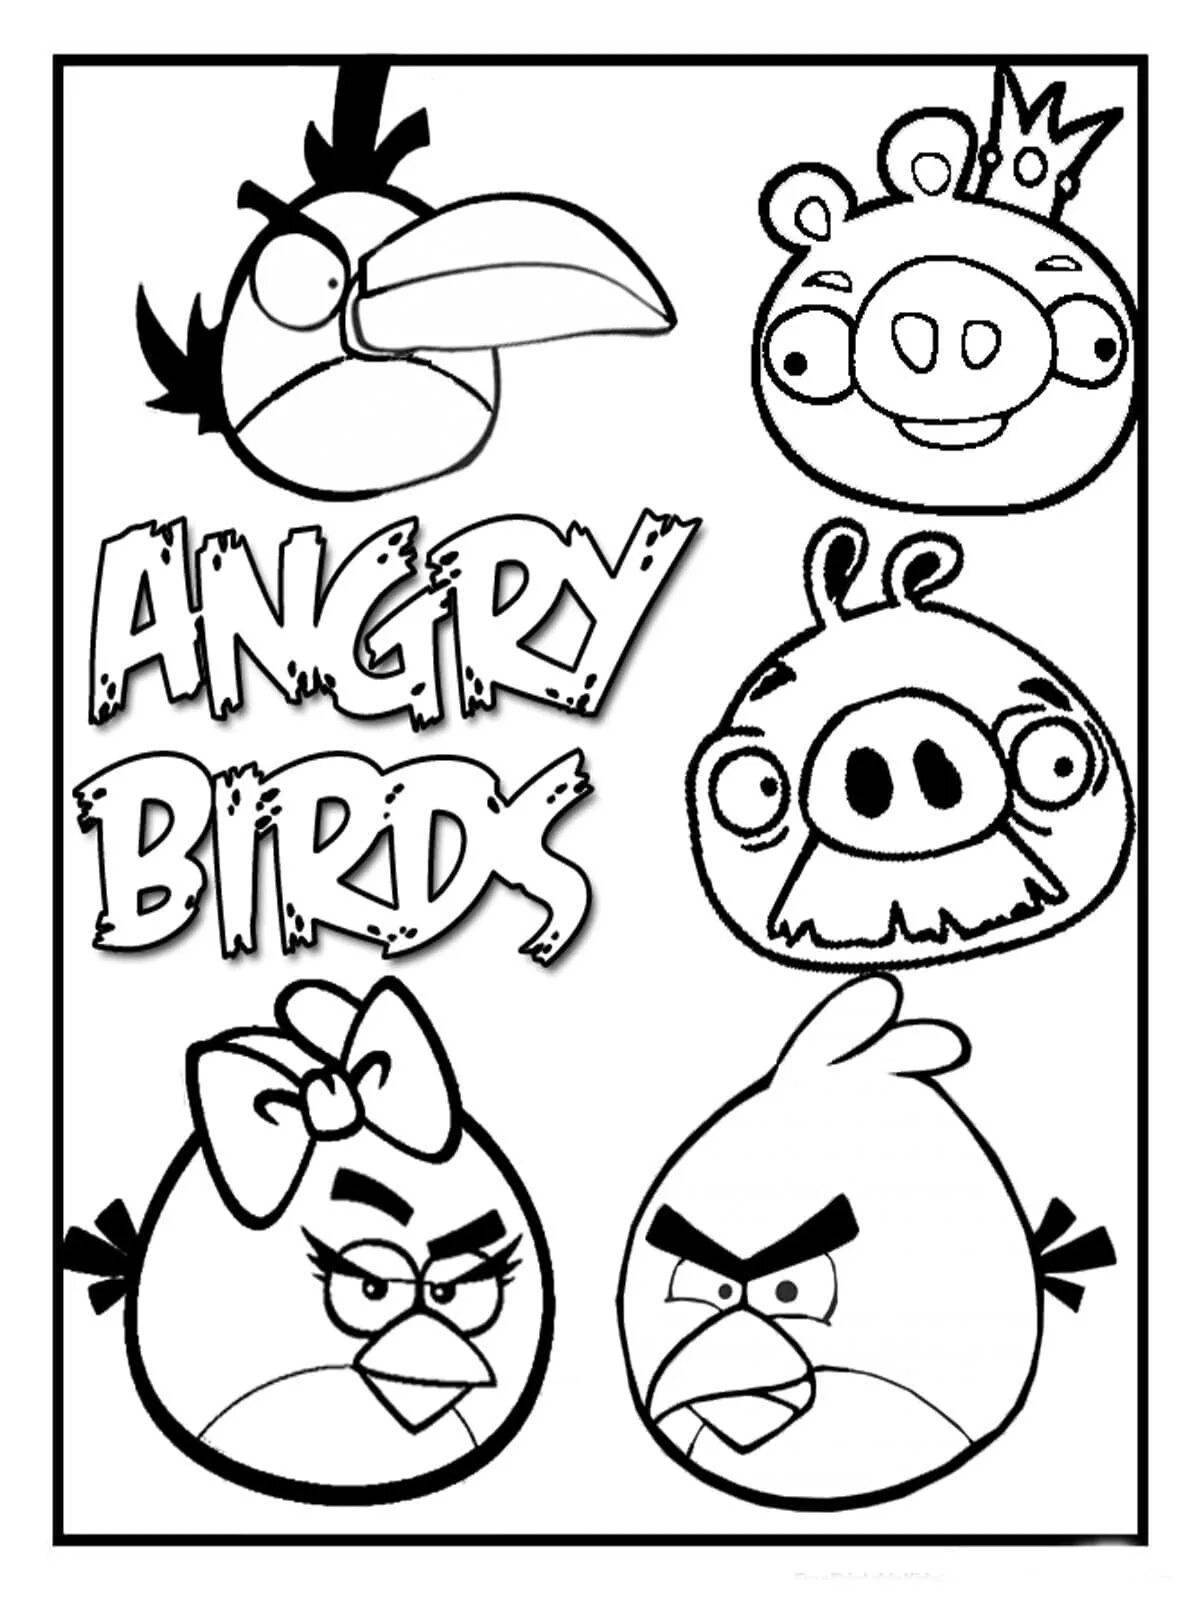 Angry birds for kids #8